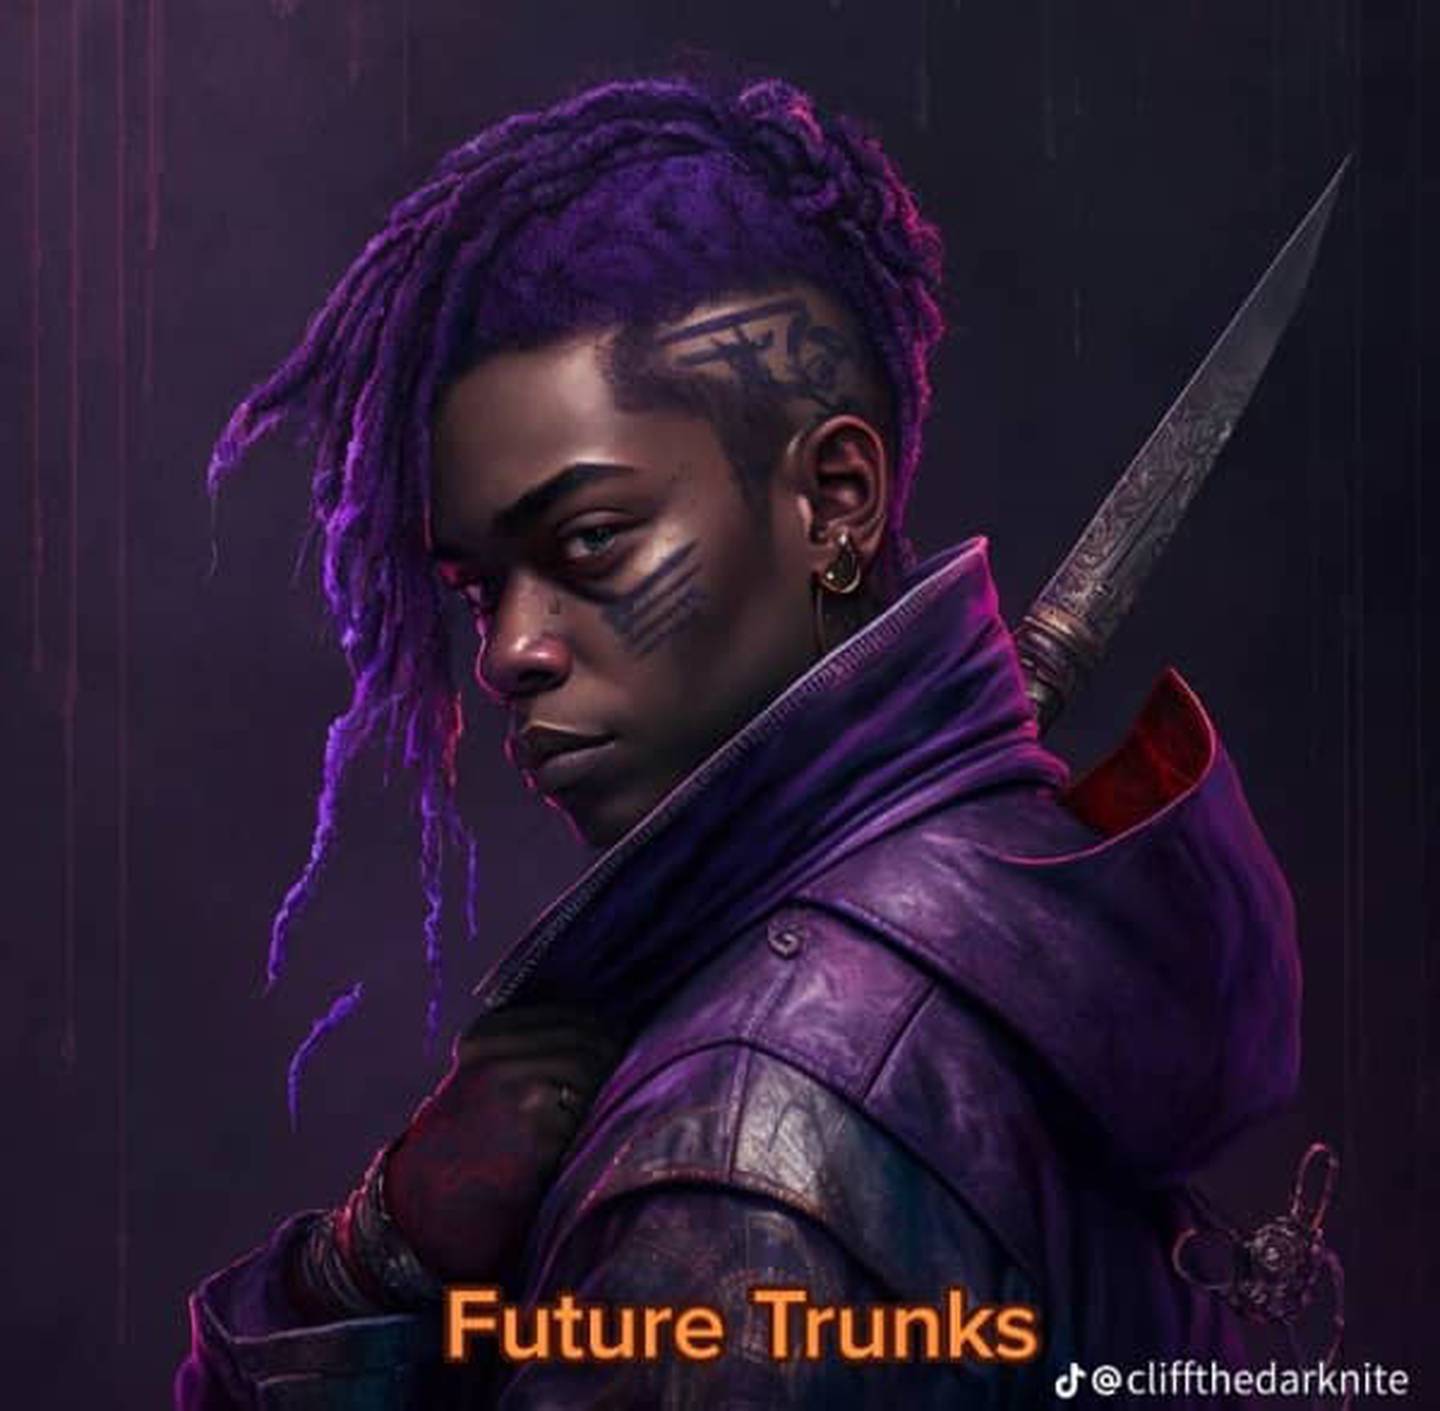 The digital artist @cliffthedarknite viralizes a TikTok video where he shows the Dragon Ball Z characters in an afro version thanks to Artificial Intelligence.